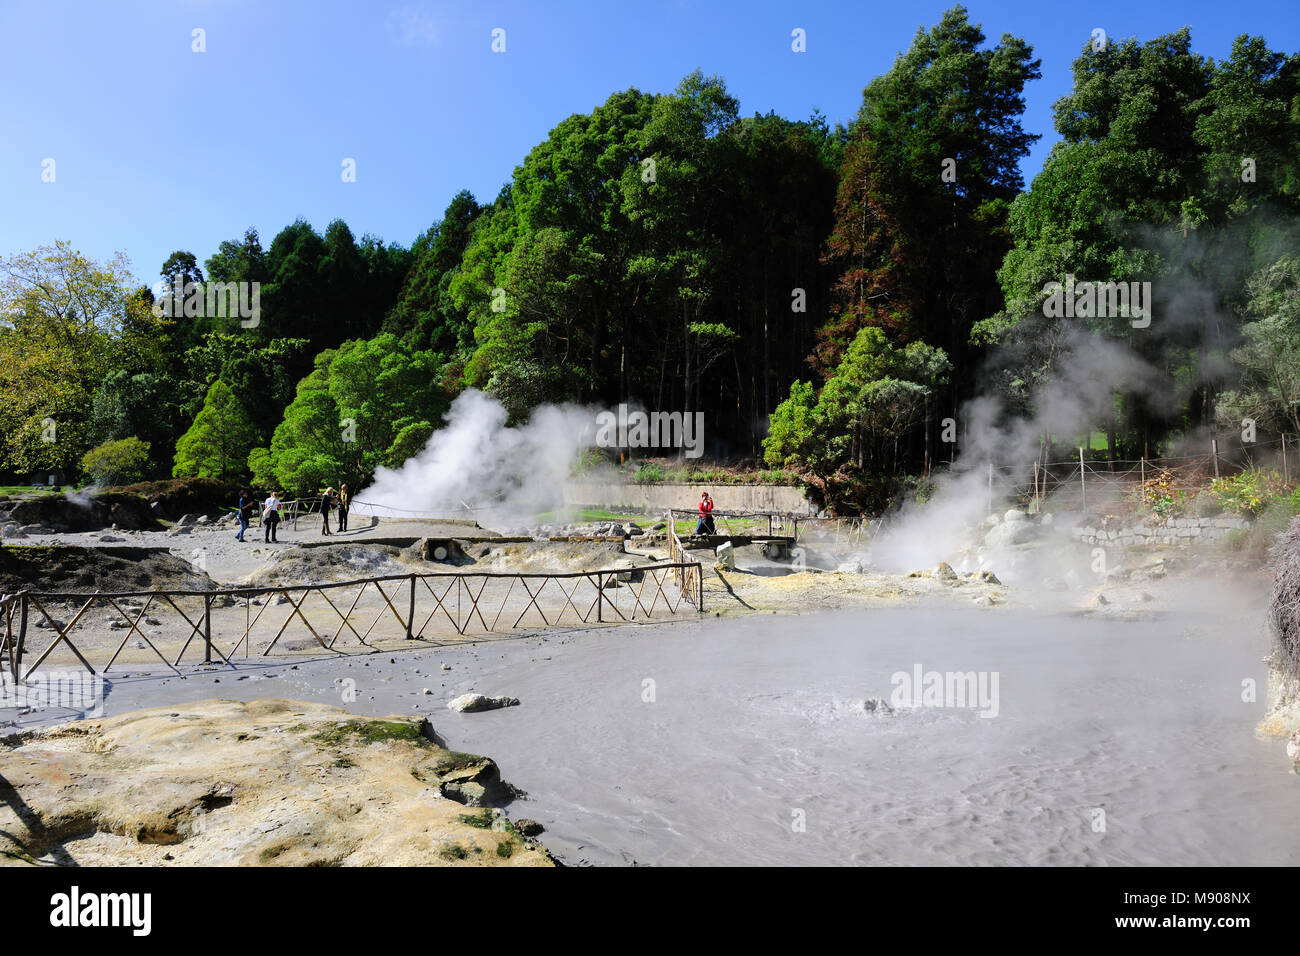 Volcanic activity with boiling mud and water at Furnas. São Miguel, Azores islands. Portugal Stock Photo